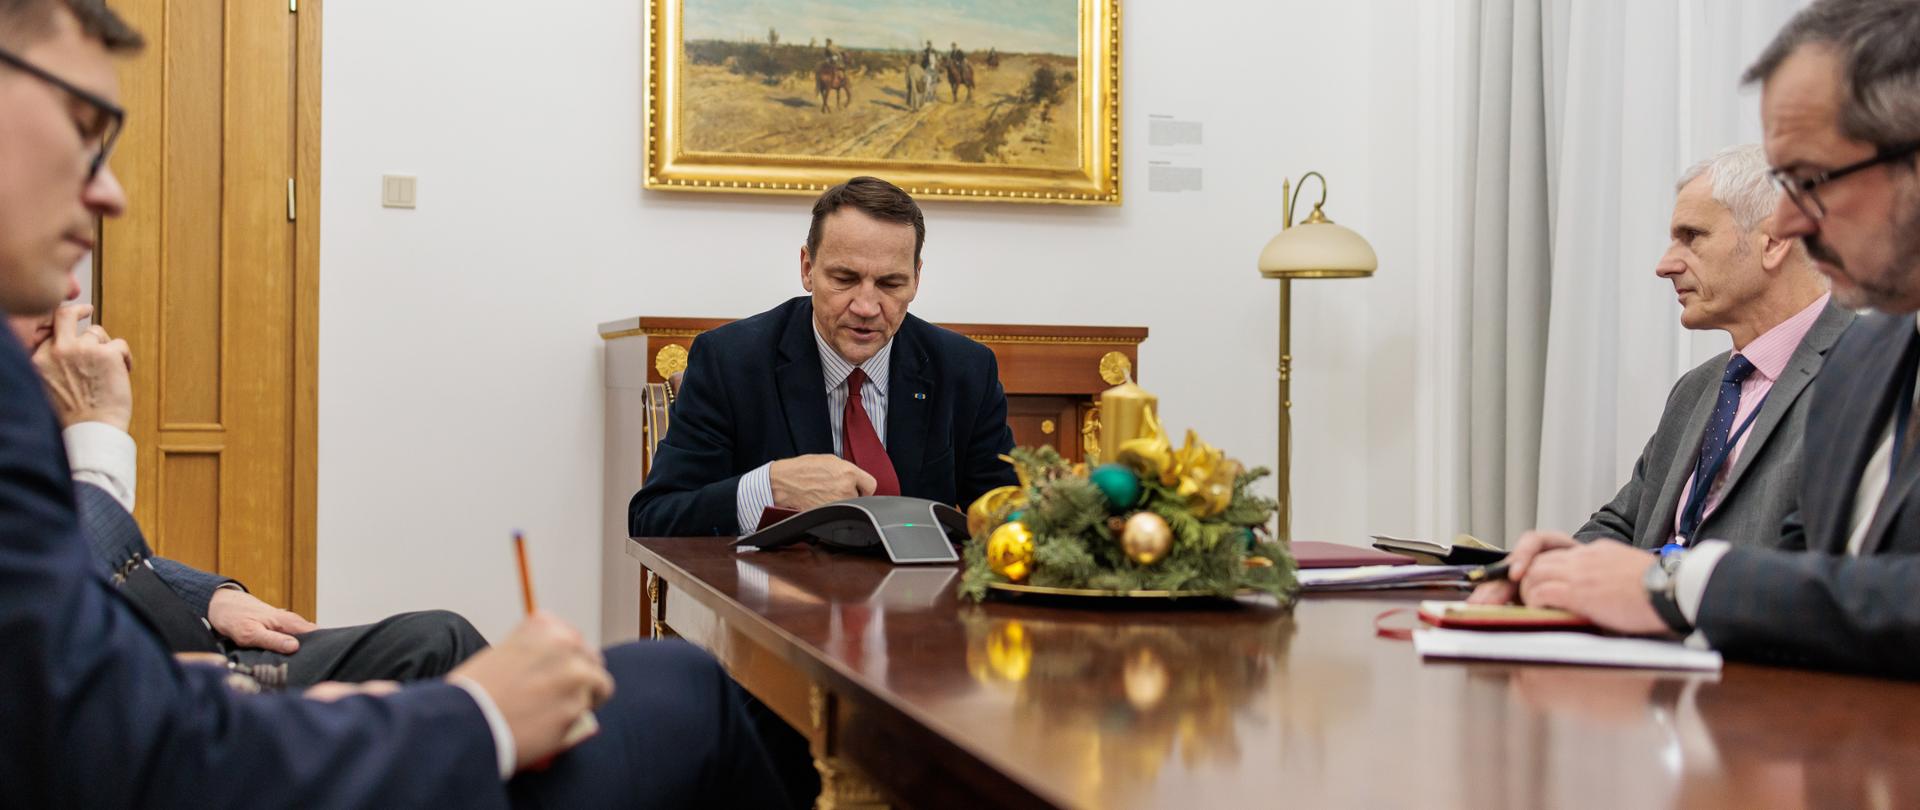 Chief of Polish diplomacy Radosław Sikorski’s call with Hungarian Minister of Foreign Affairs and Trade Peter Szijjártó